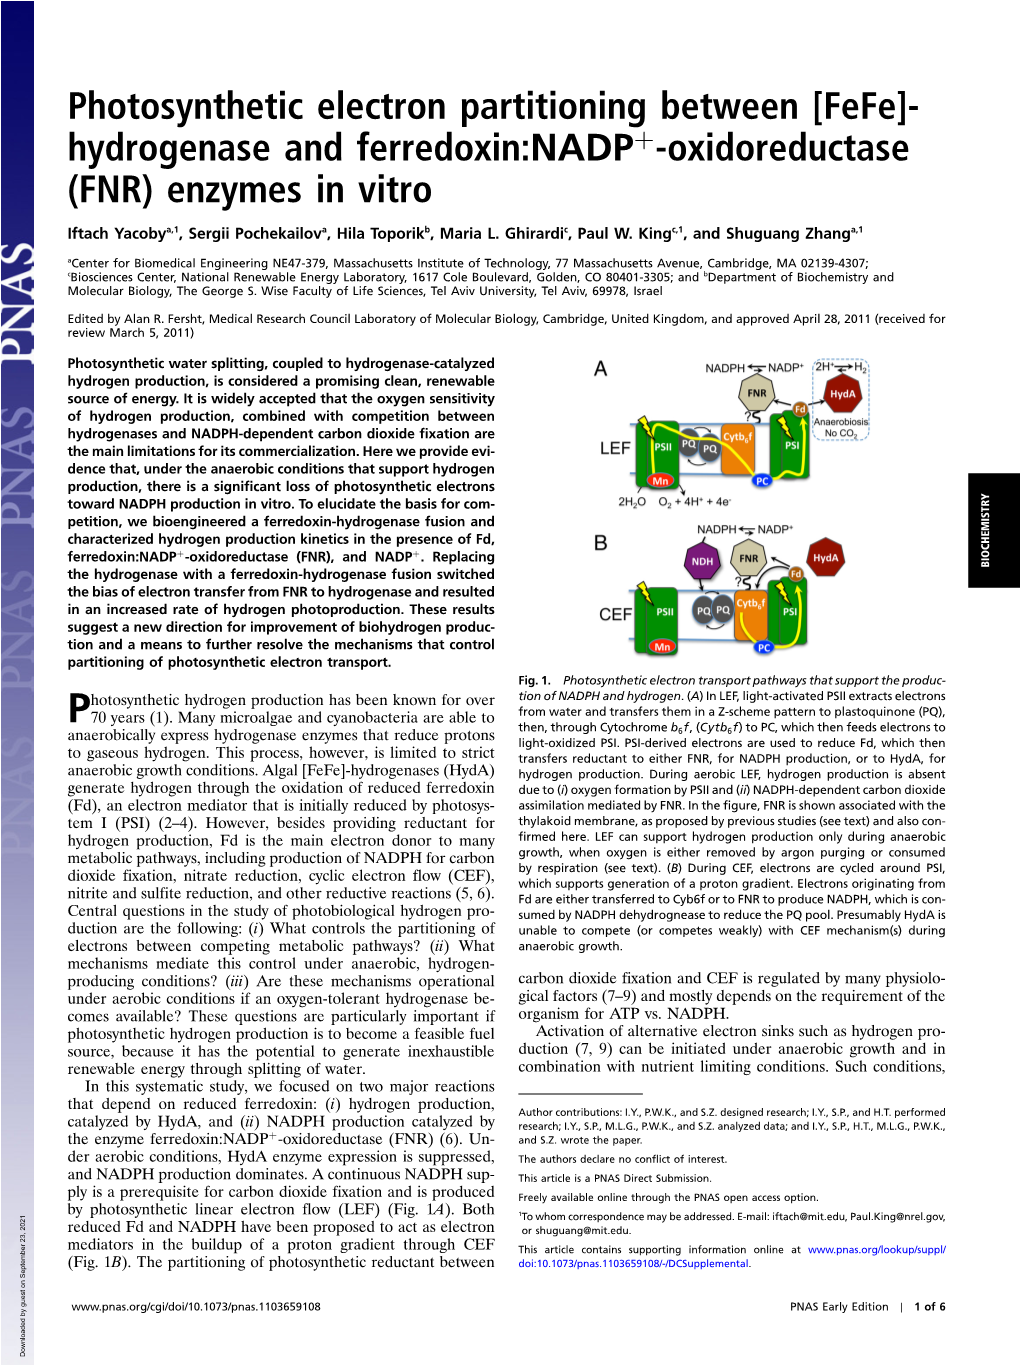 Photosynthetic Electron Partitioning Between [Fefe]- Hydrogenase and Ferredoxin:Nadpþ-Oxidoreductase (FNR) Enzymes in Vitro